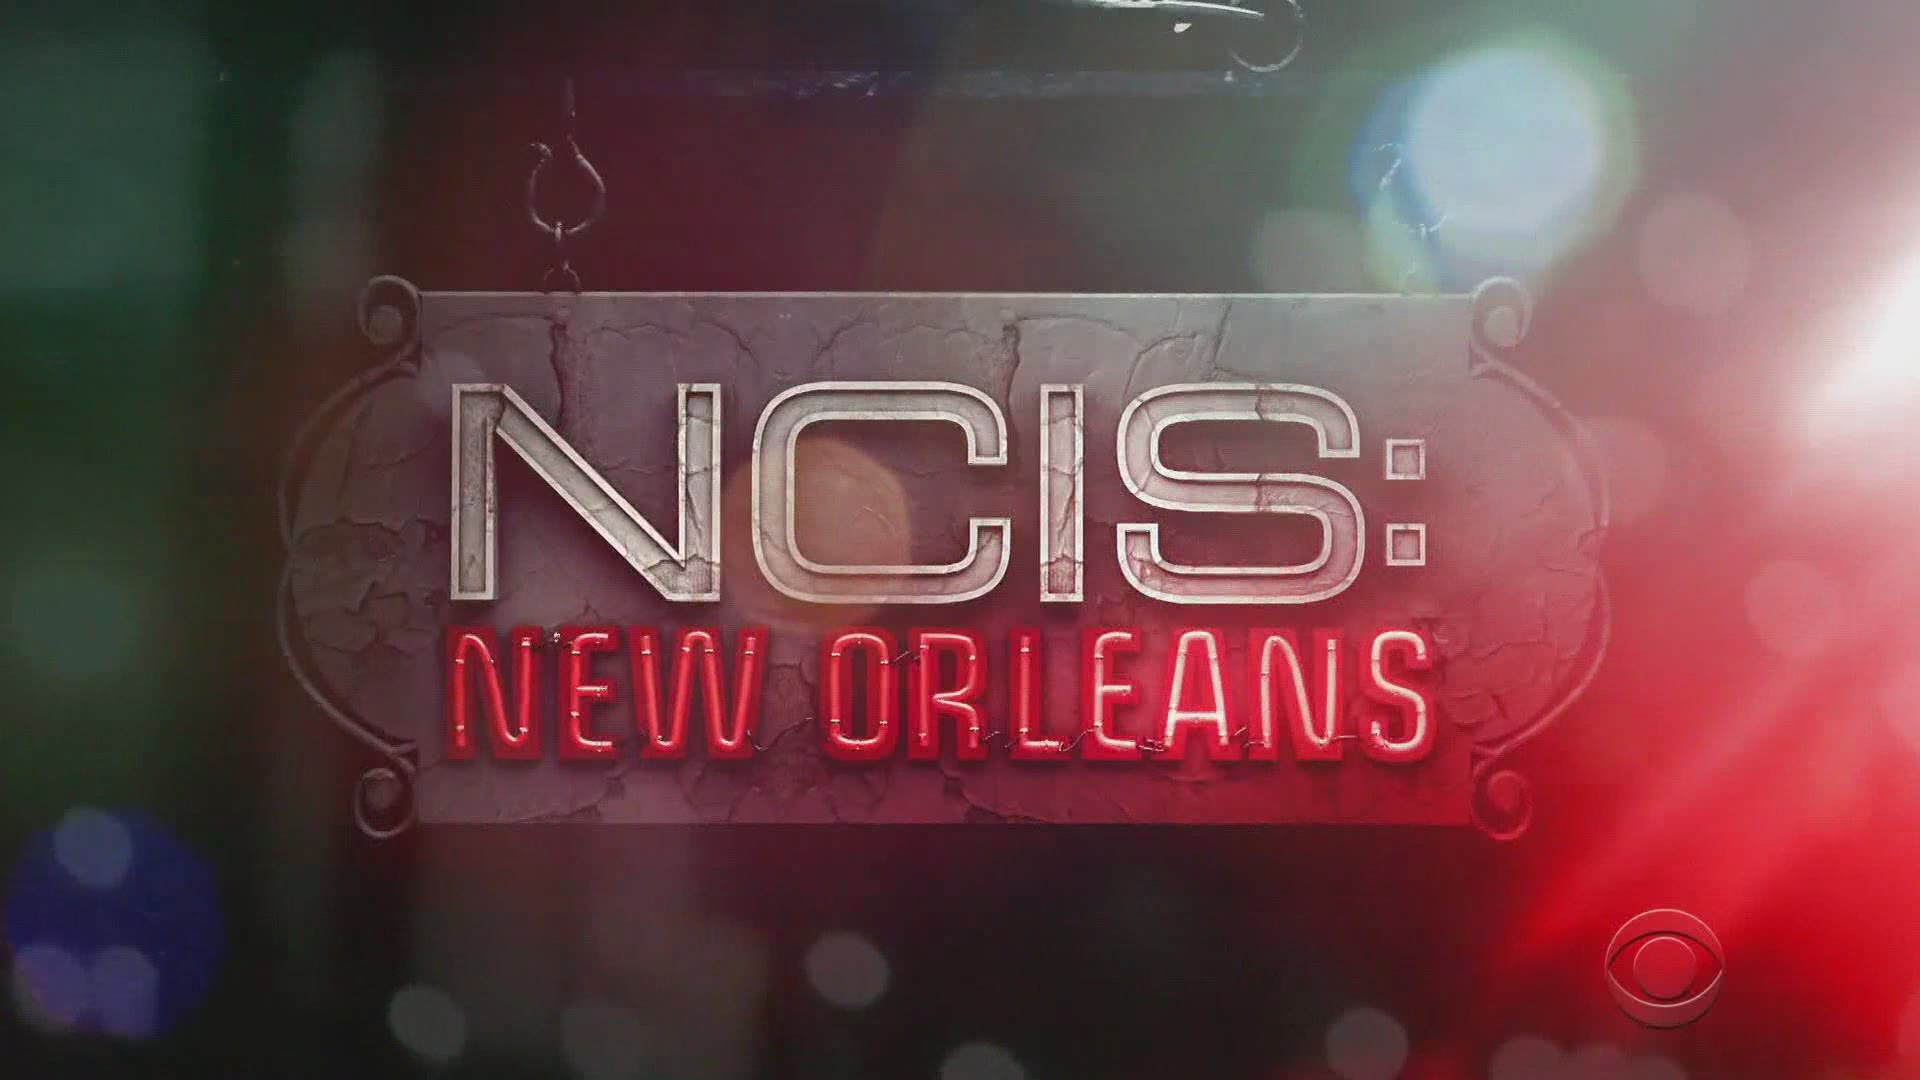 After 7 seasons in the city, NCIS is leaving New Orleans. Final episode airs May 23.